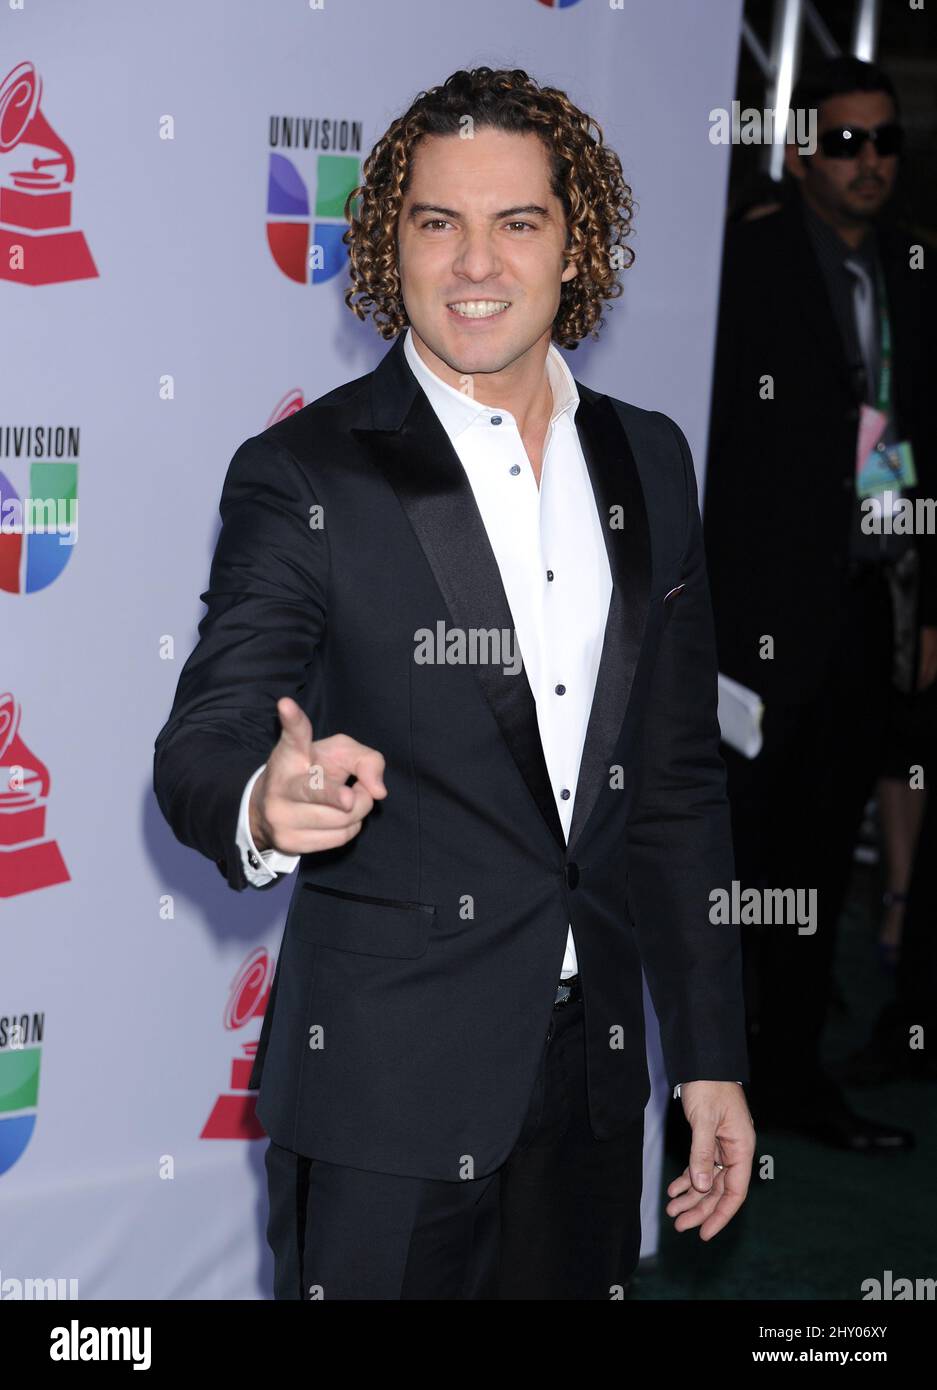 David Bisbal attends the 13th Annual Latin Grammy Awards held at the Mandalay Bay Events Center, Las Vegas, Nevada on November 15, 2012. Stock Photo